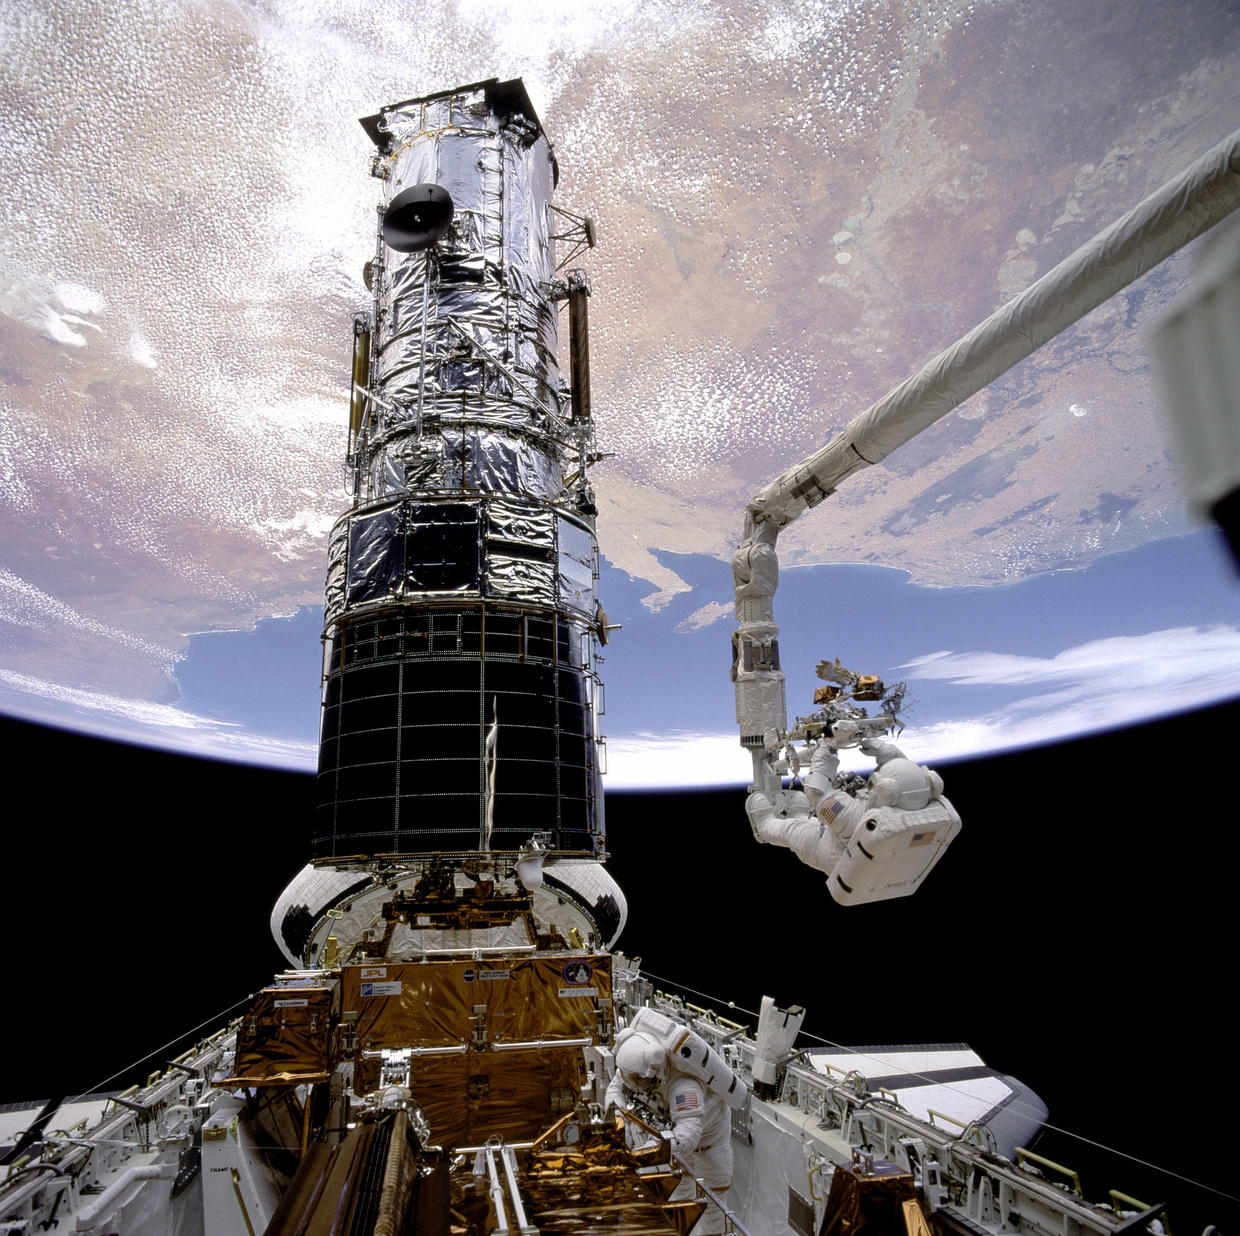 Endeavour astronauts repairing the Hubble Space Telescope in space